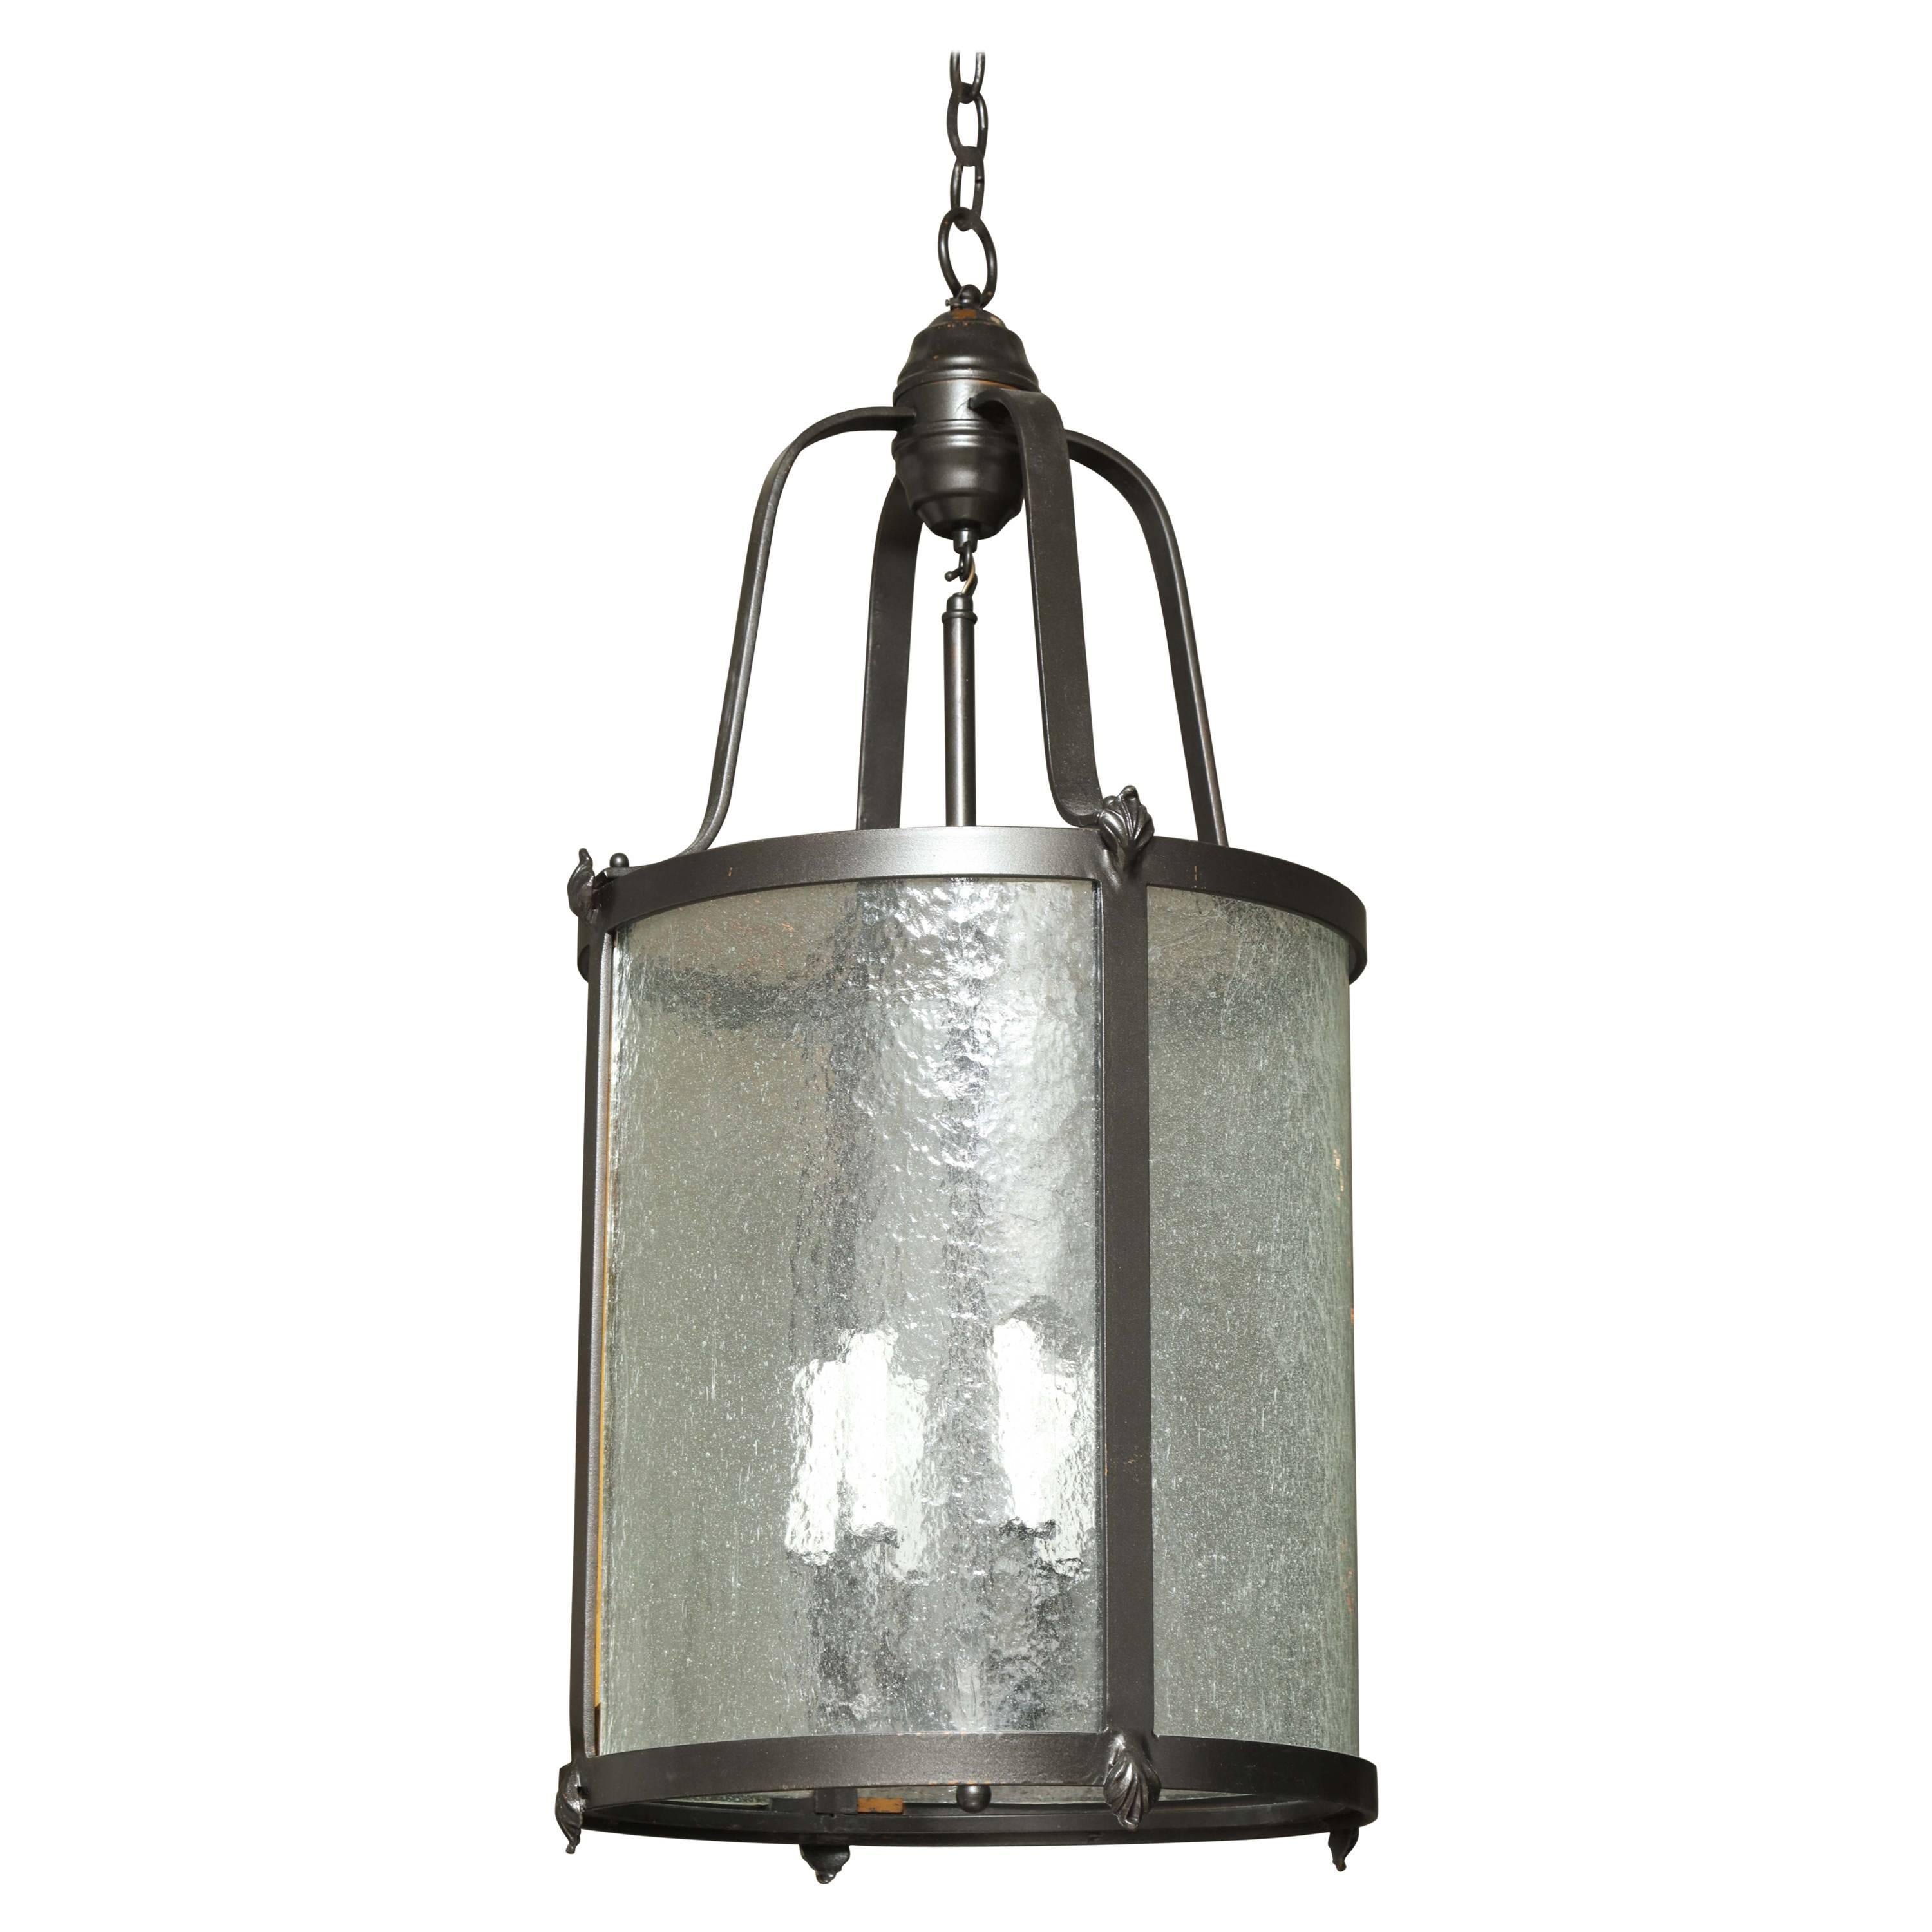 Mid-20th Century Oil-Rubbed Bronze and Glass Chandelier